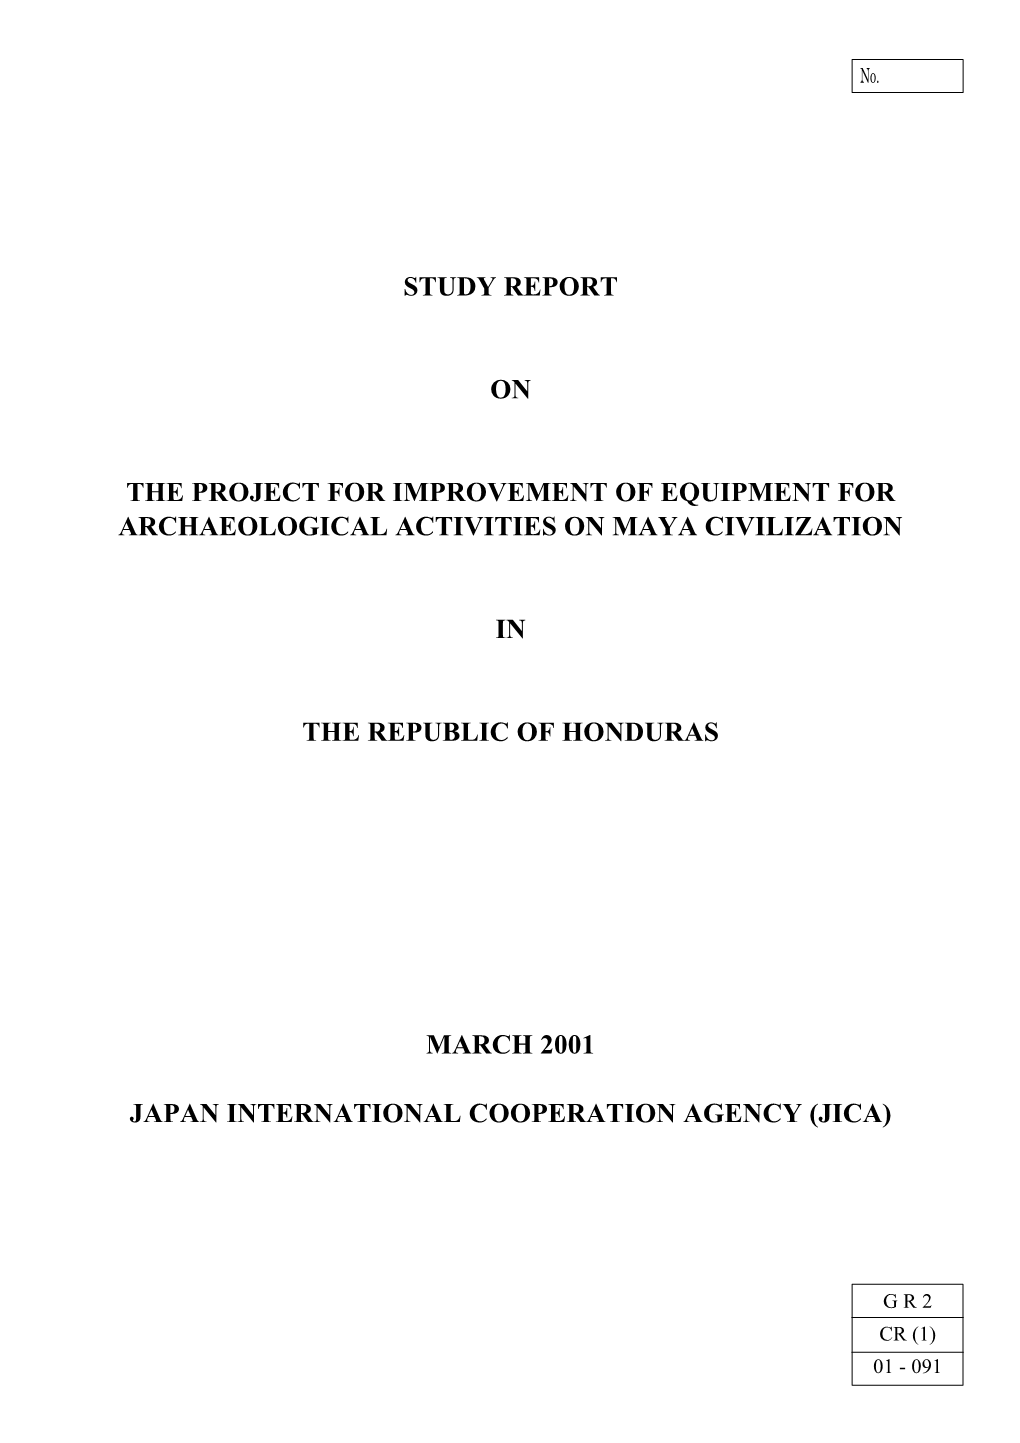 March 2001 Japan International Cooperation